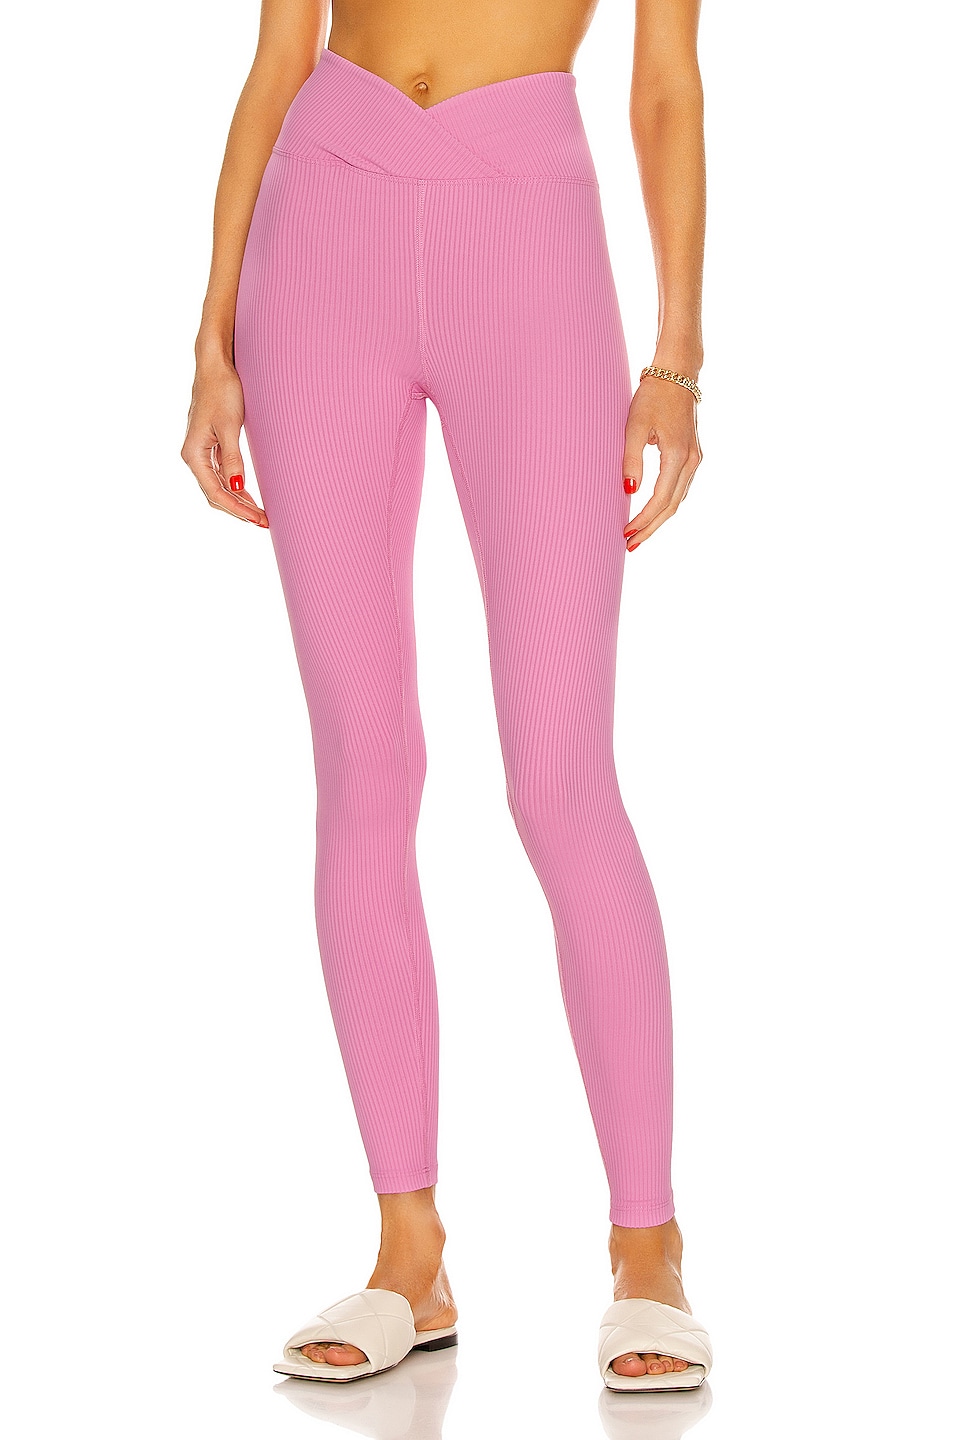 YEAR OF OURS Ribbed Veronica Legging in True Pink | FWRD